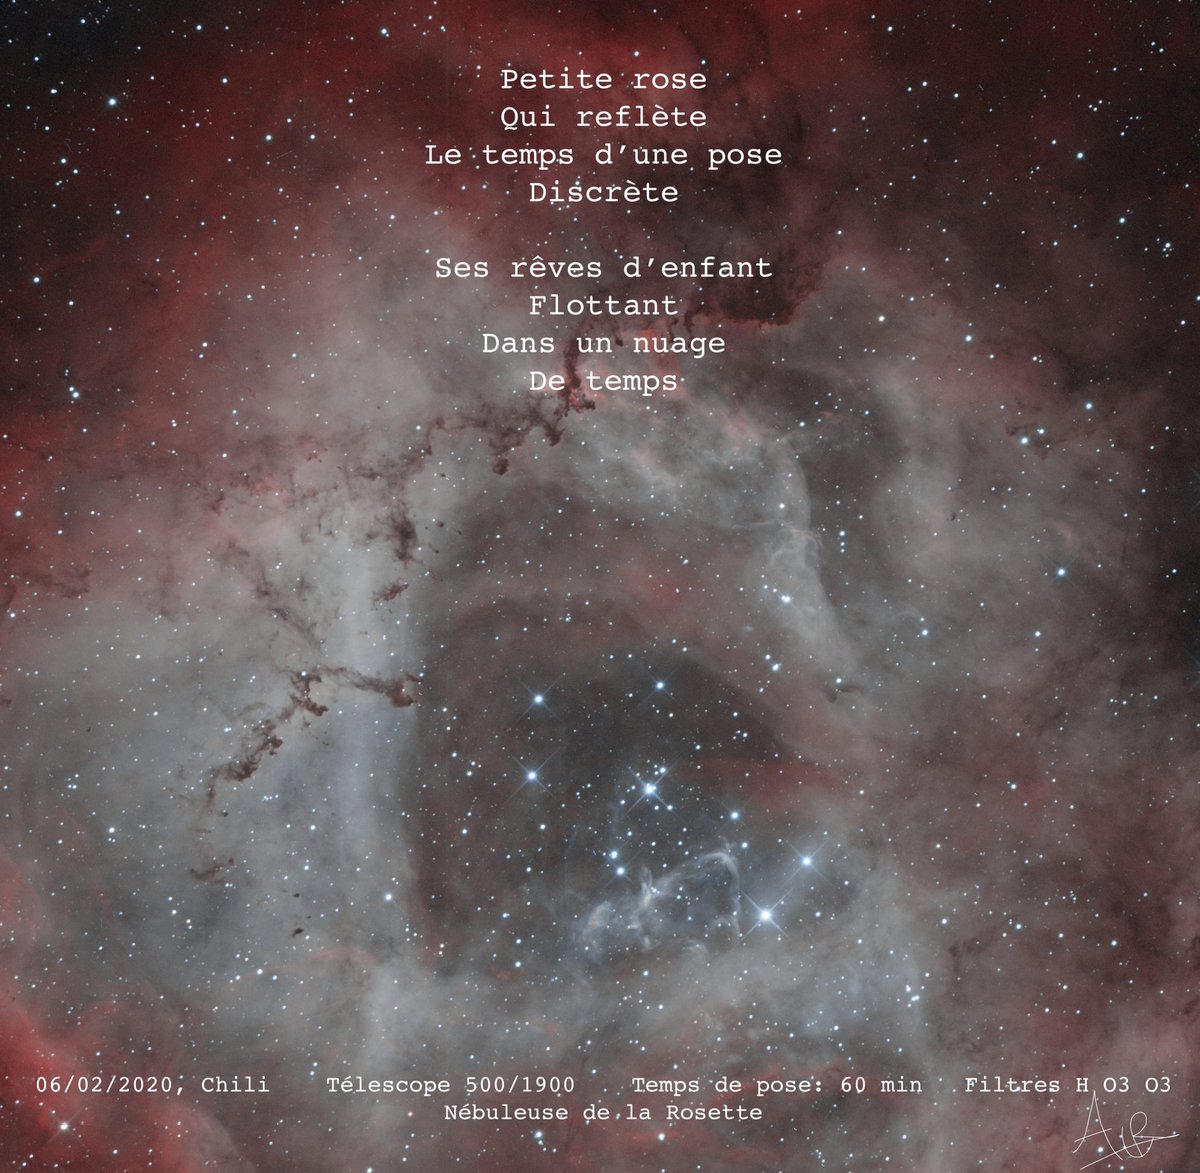 @AshwiniDodani @Internella @OddWritings @_cryptopoet @CryptoPoetry @craig_polston @deadsocpoetry @FungalNFT @JoeyMagia @Katie_Dozier @Merzmensch @x_rVb_x @edgepoetry_nft @wordstobepoetry Astro-poem #1, picture (via a telescope) and poem by Air. 
Art print  with A.R effect available
airtwoair.com/astropoems/